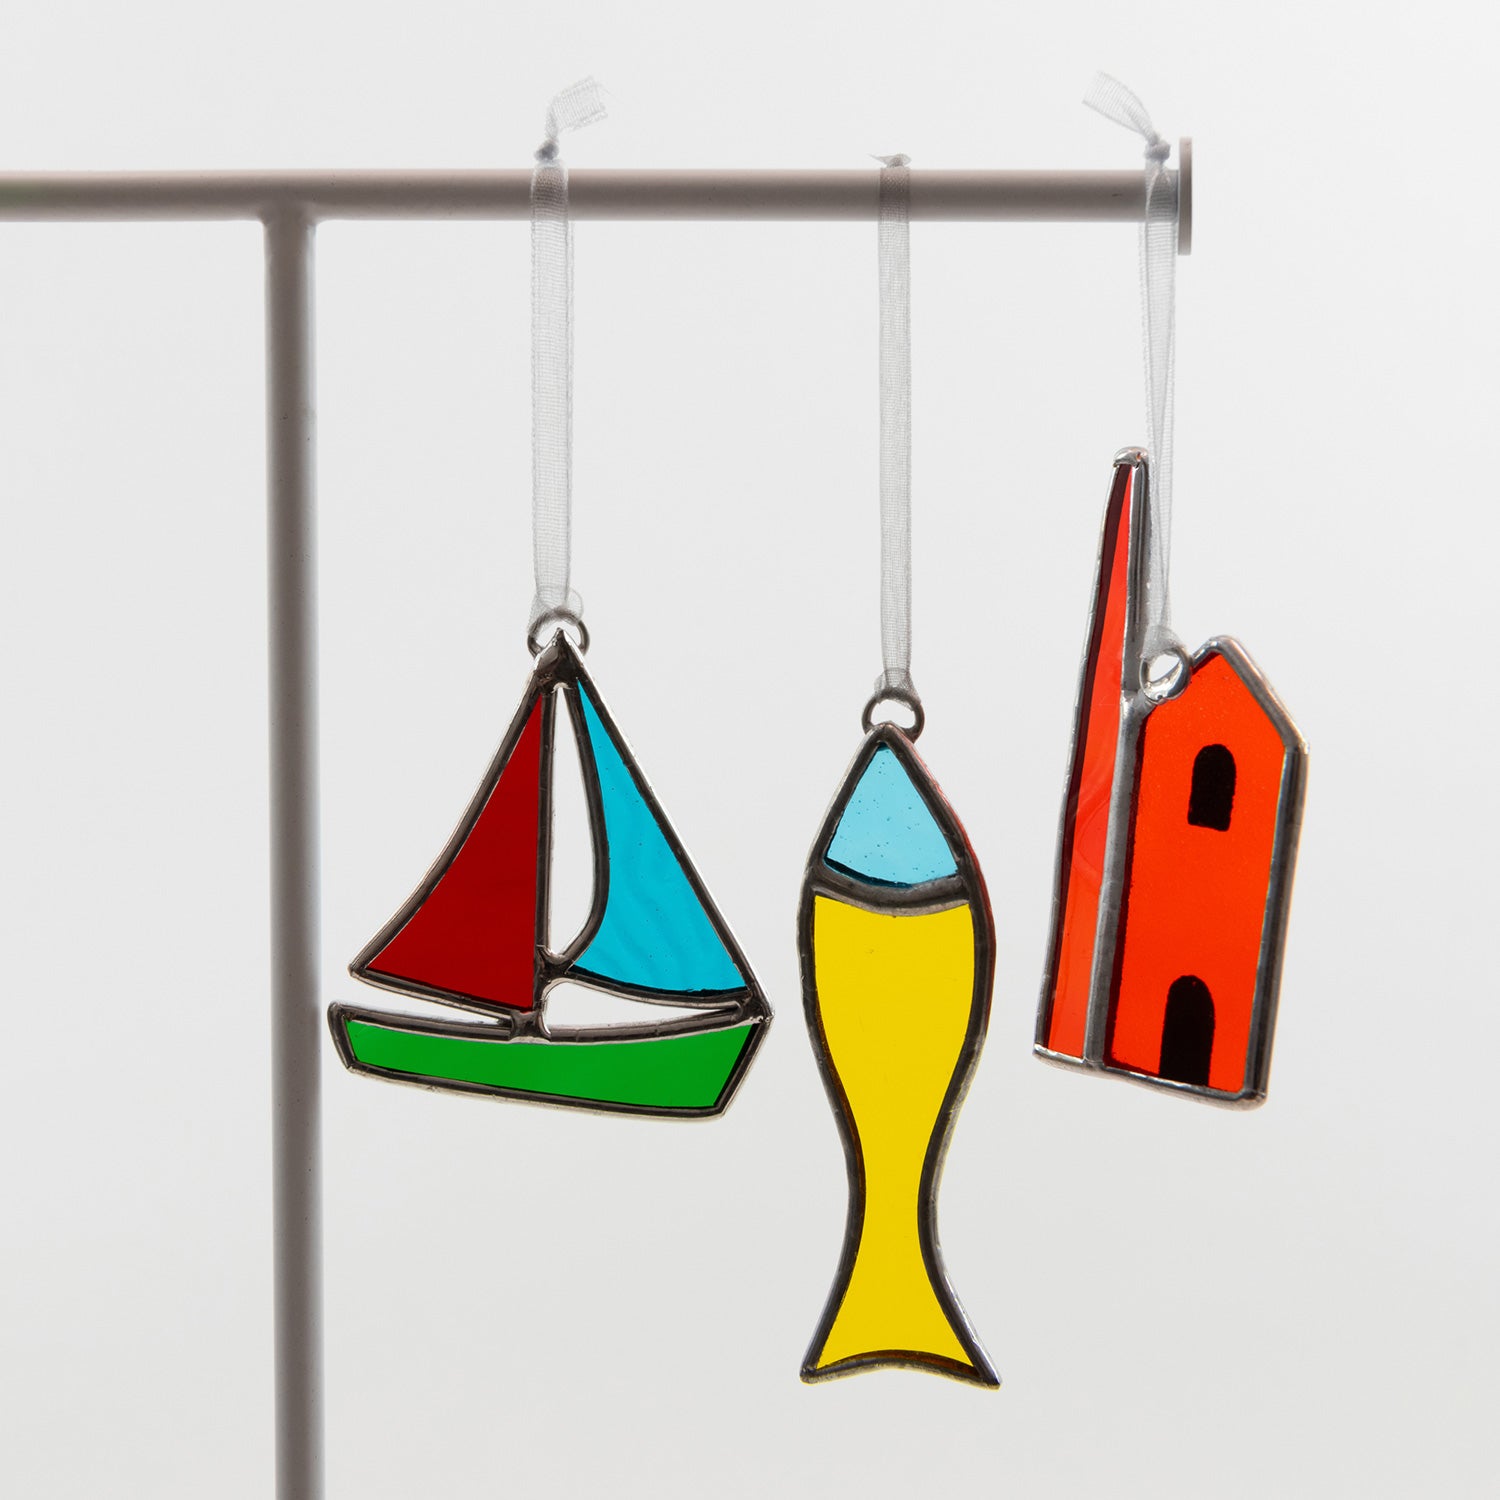 Three glass decorations hanging, on a white background. There's a sailboat, a fish, and an engine house.